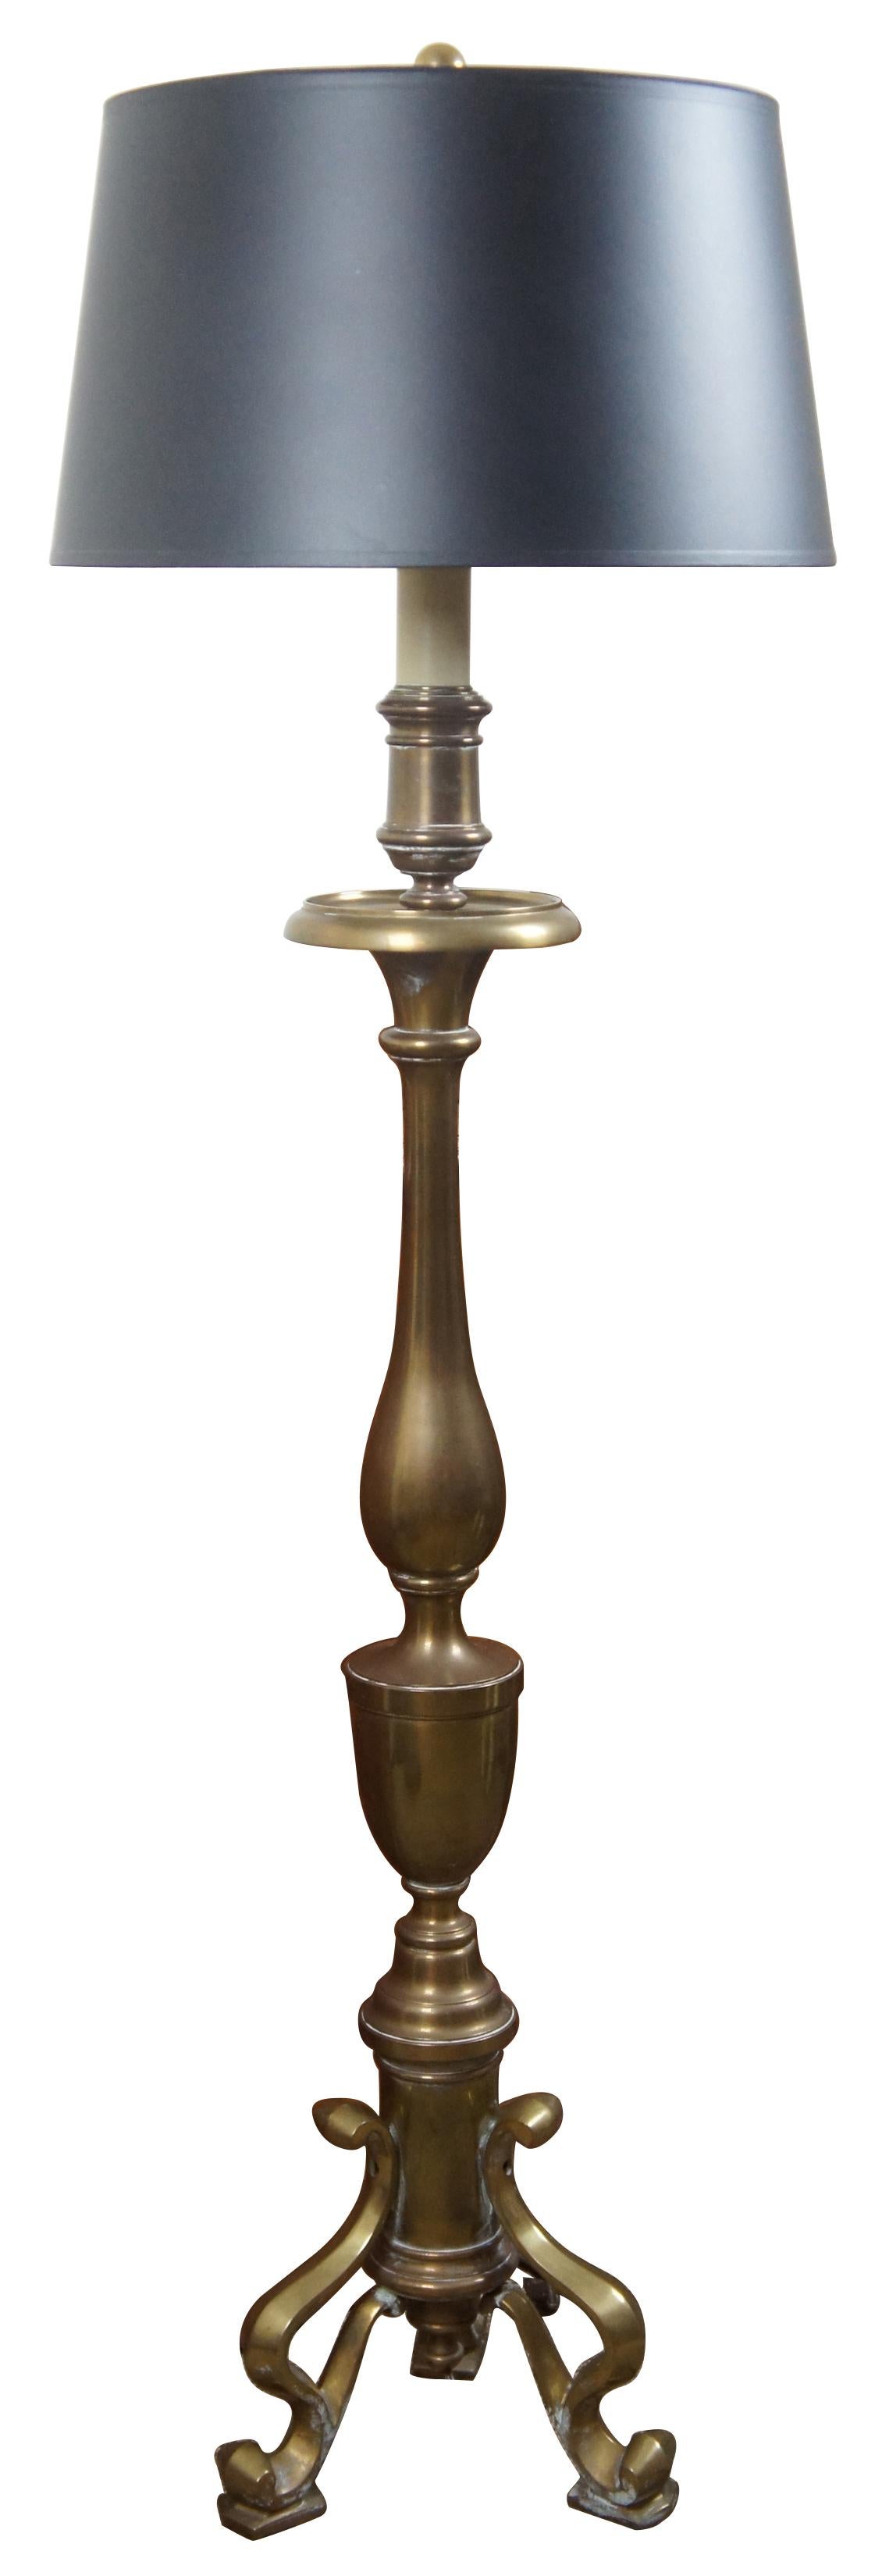 Vintage 1972 Chapman brass floor lamp. Model X739B floor candlestick lamp. Features Hollywood Regency or traditional styling.

Measures: Shade 18.25” x 10” (Diameter x height).